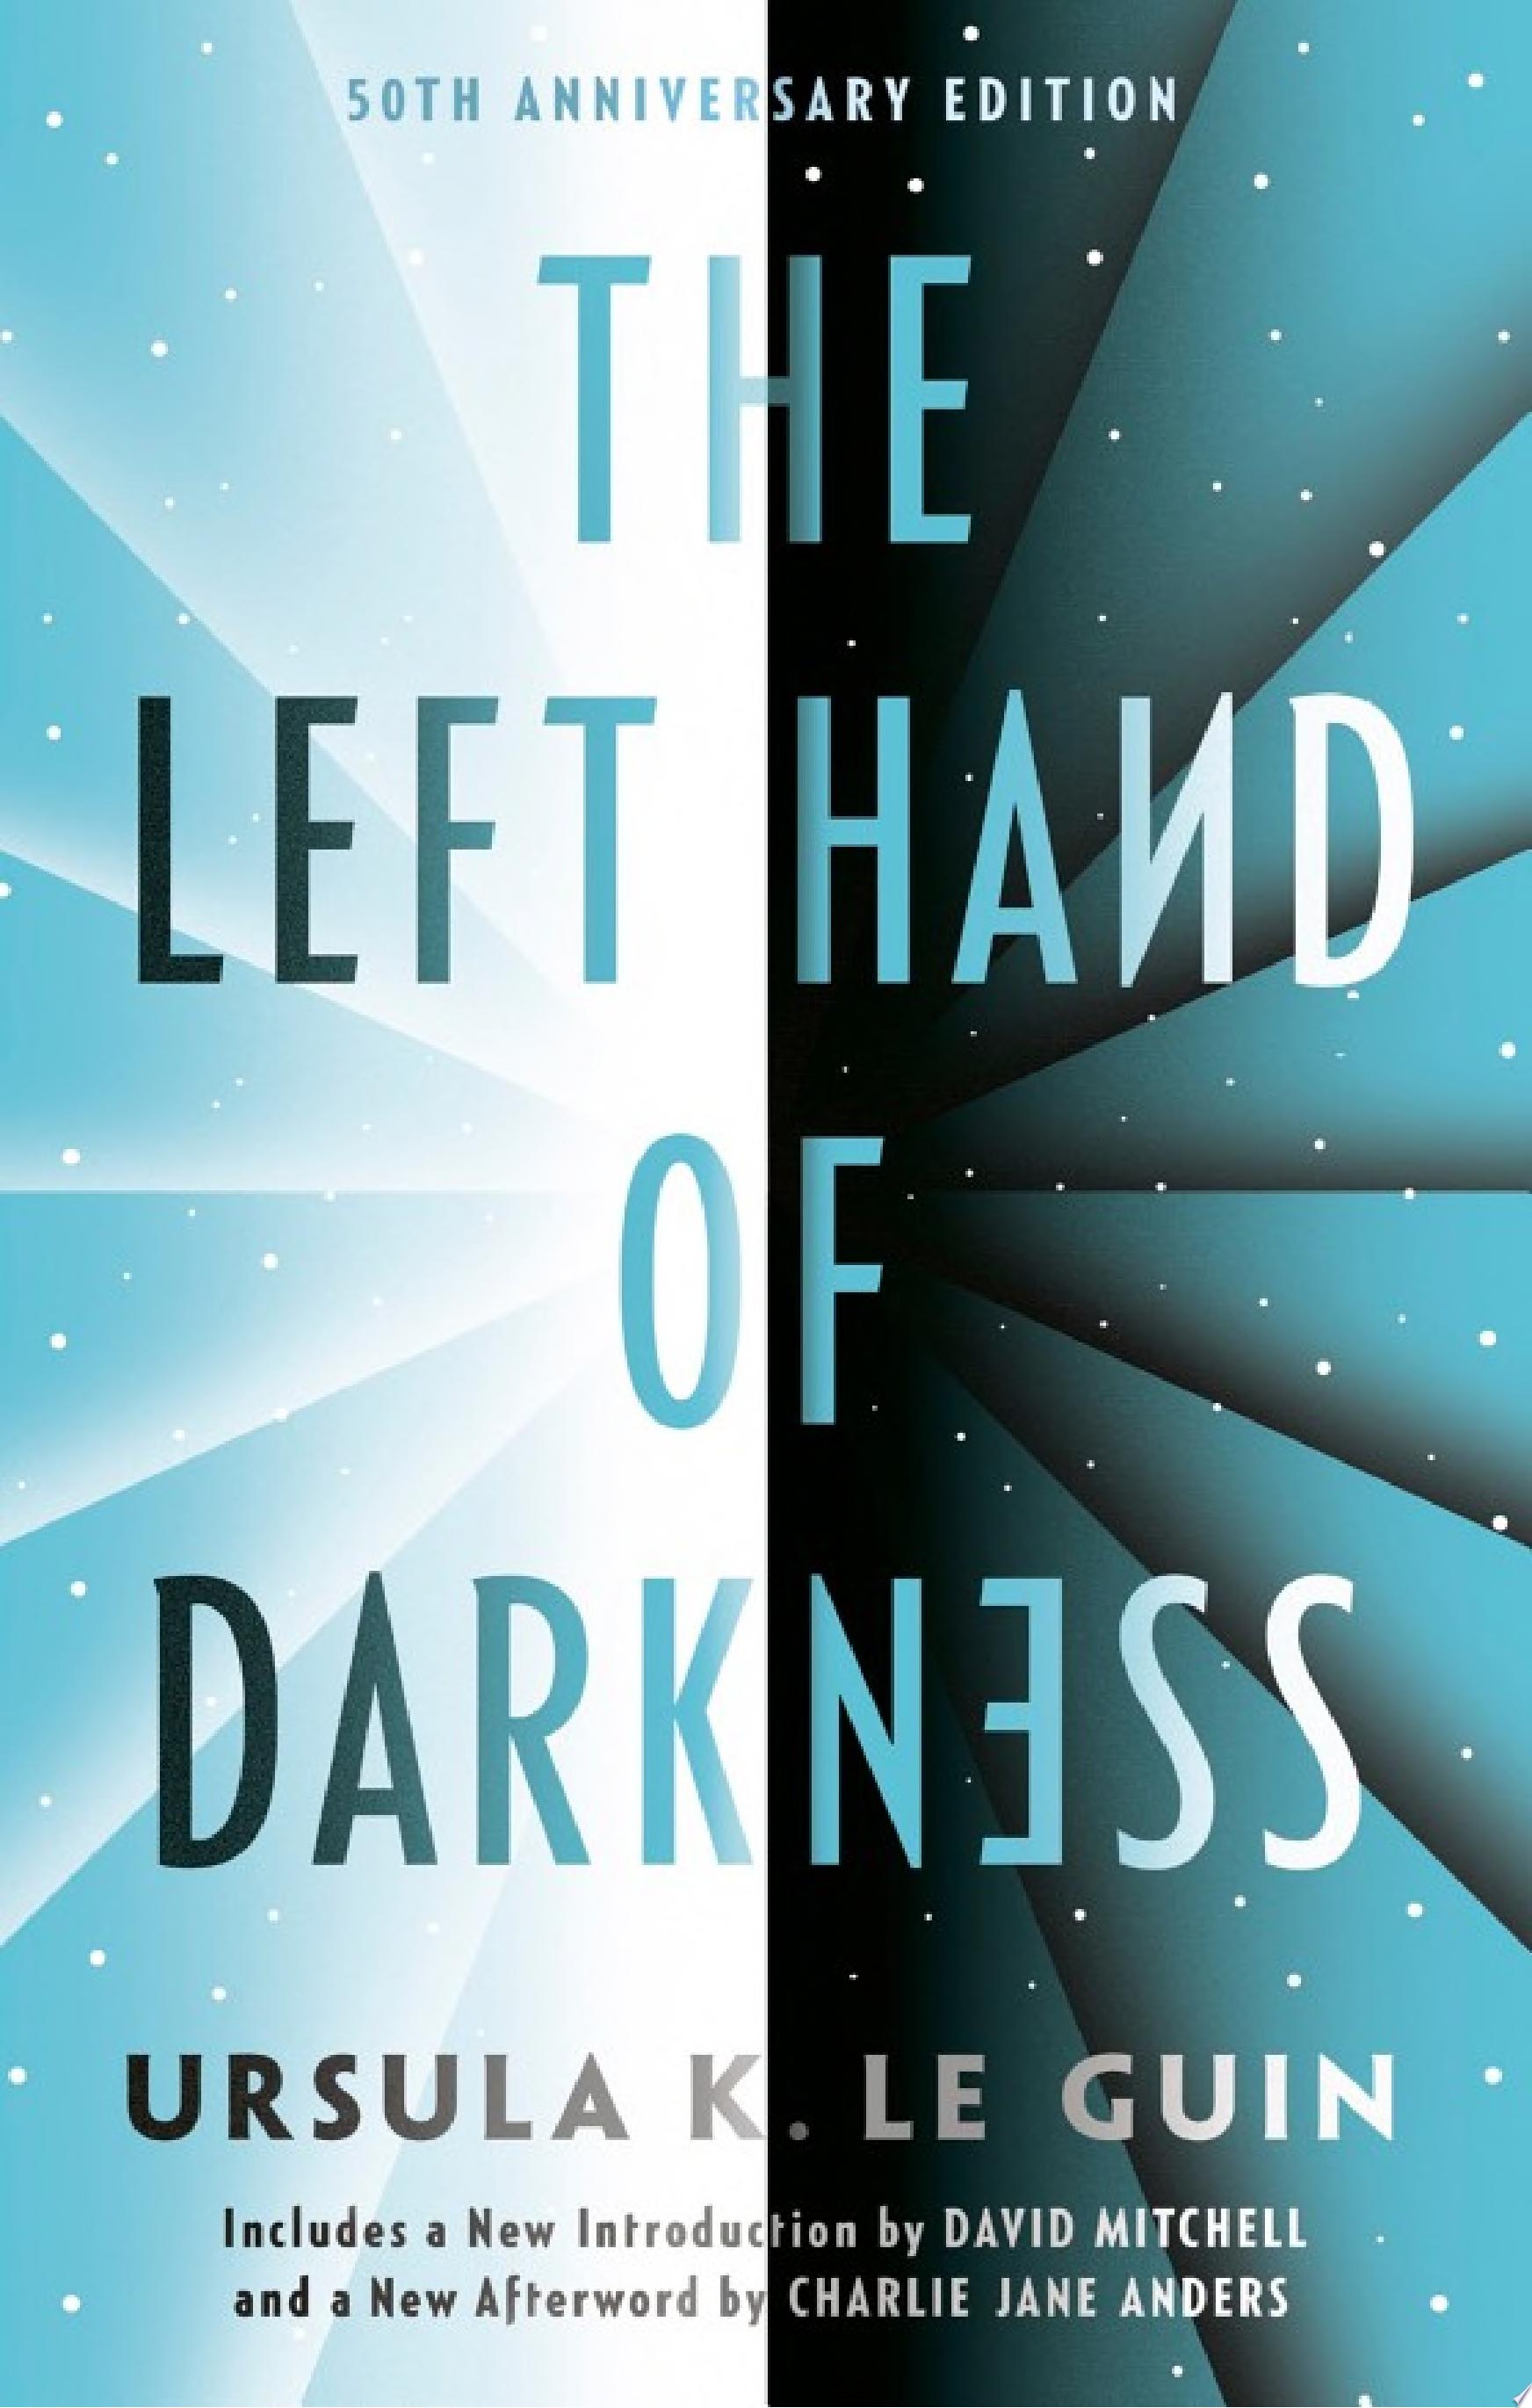 Image for "The Left Hand of Darkness"